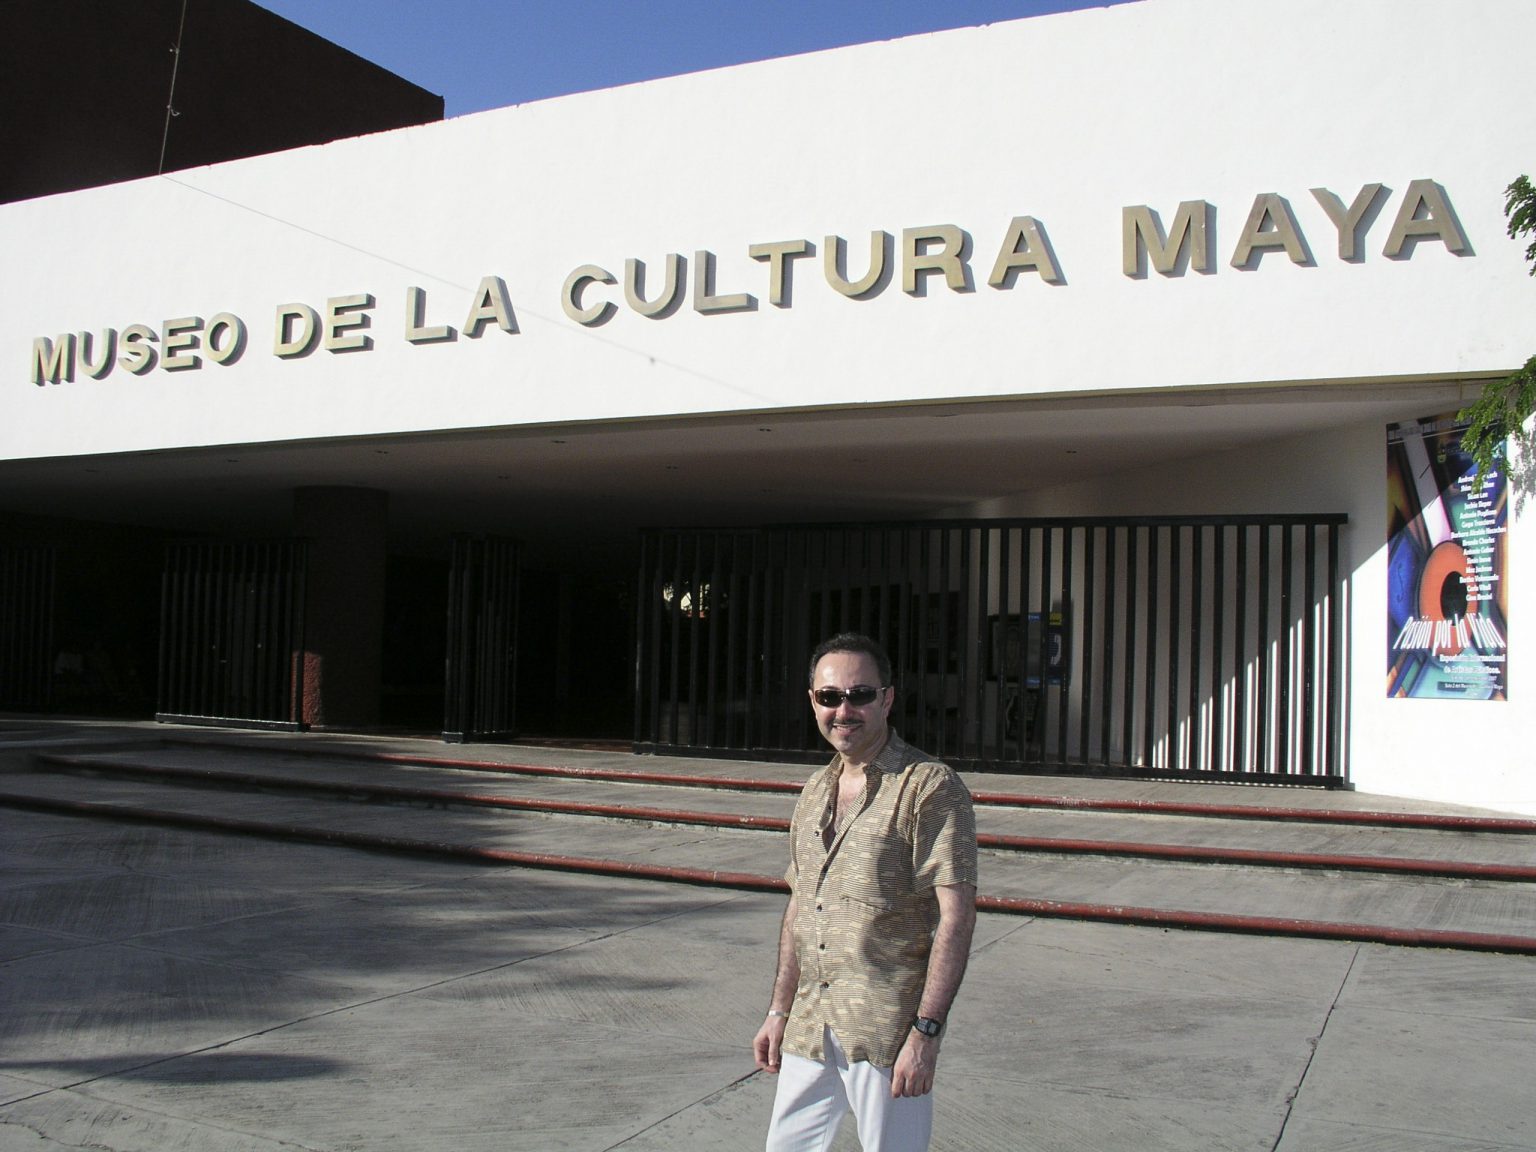 Impressionist painter Antoine Gaber held the first International “Passion for Life” Group Art Exhibition in Mexico, launched at the “Museo de la Cultura Maya” in the City of Chetumal, State of Quintana Roo, Mexico.